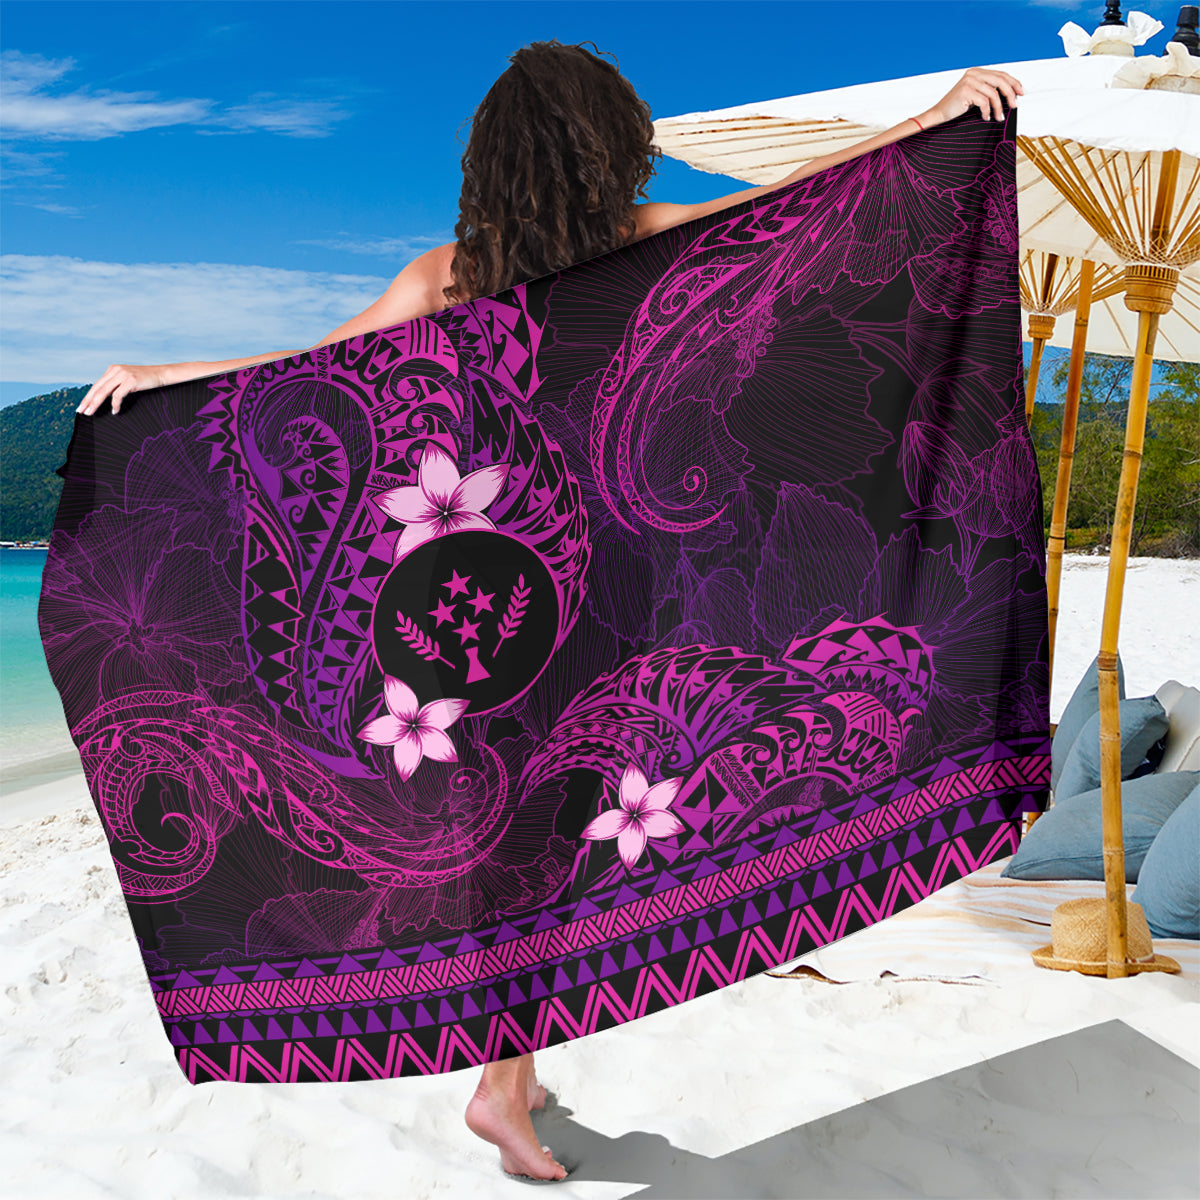 FSM Kosrae State Sarong Tribal Pattern Pink Version LT01 One Size 44 x 66 inches Pink - Polynesian Pride